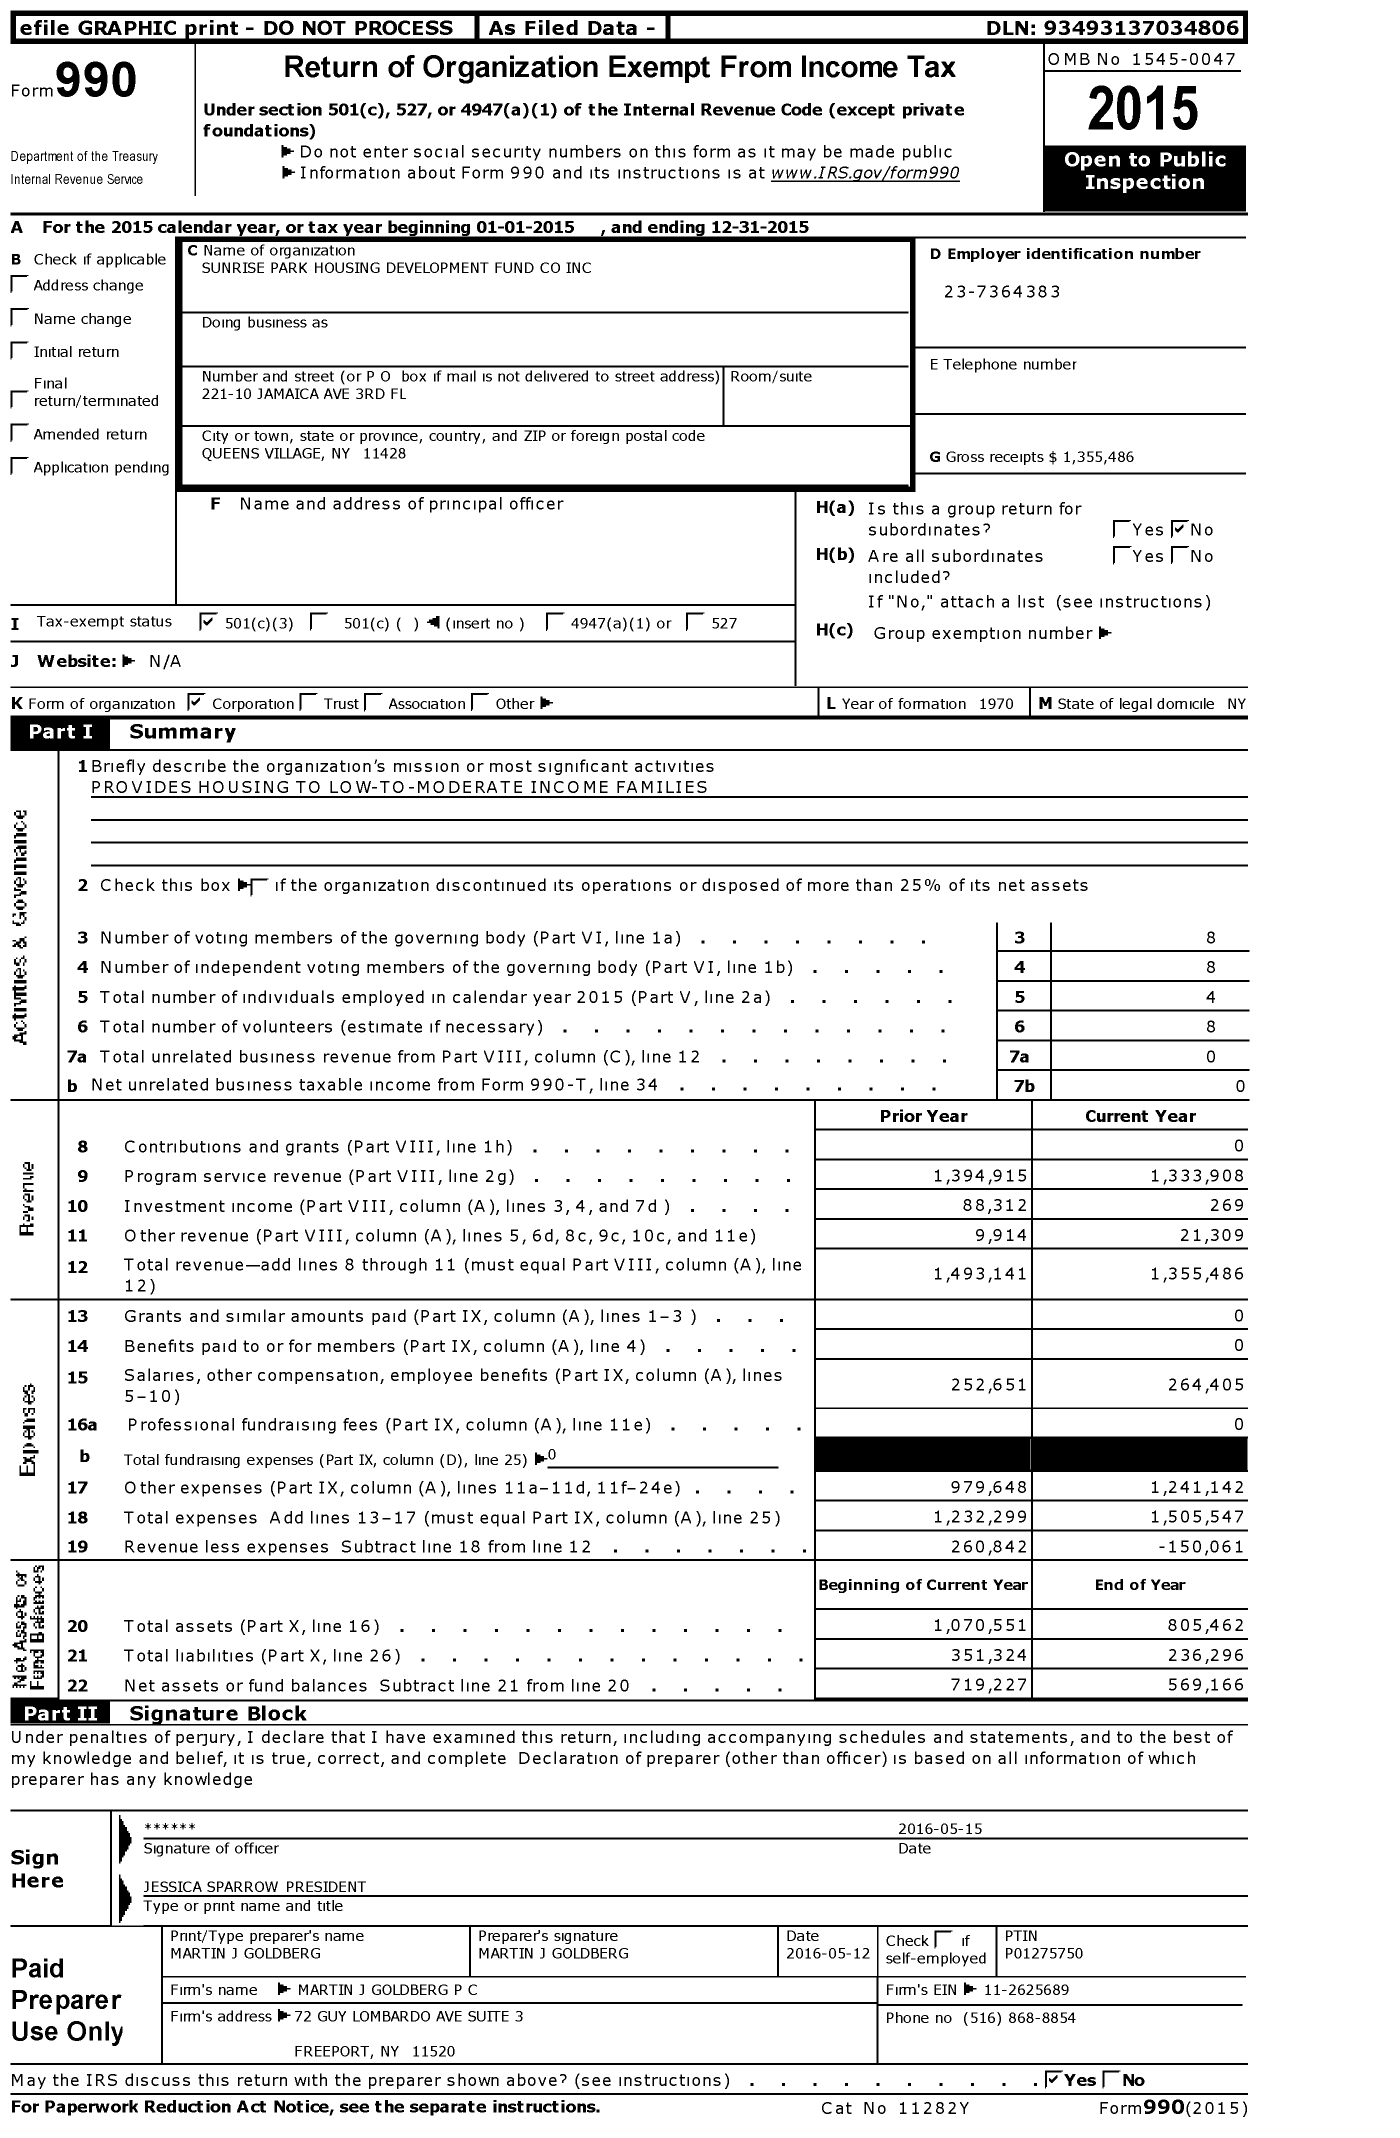 Image of first page of 2015 Form 990 for Sunrise Park Housing Development Fund